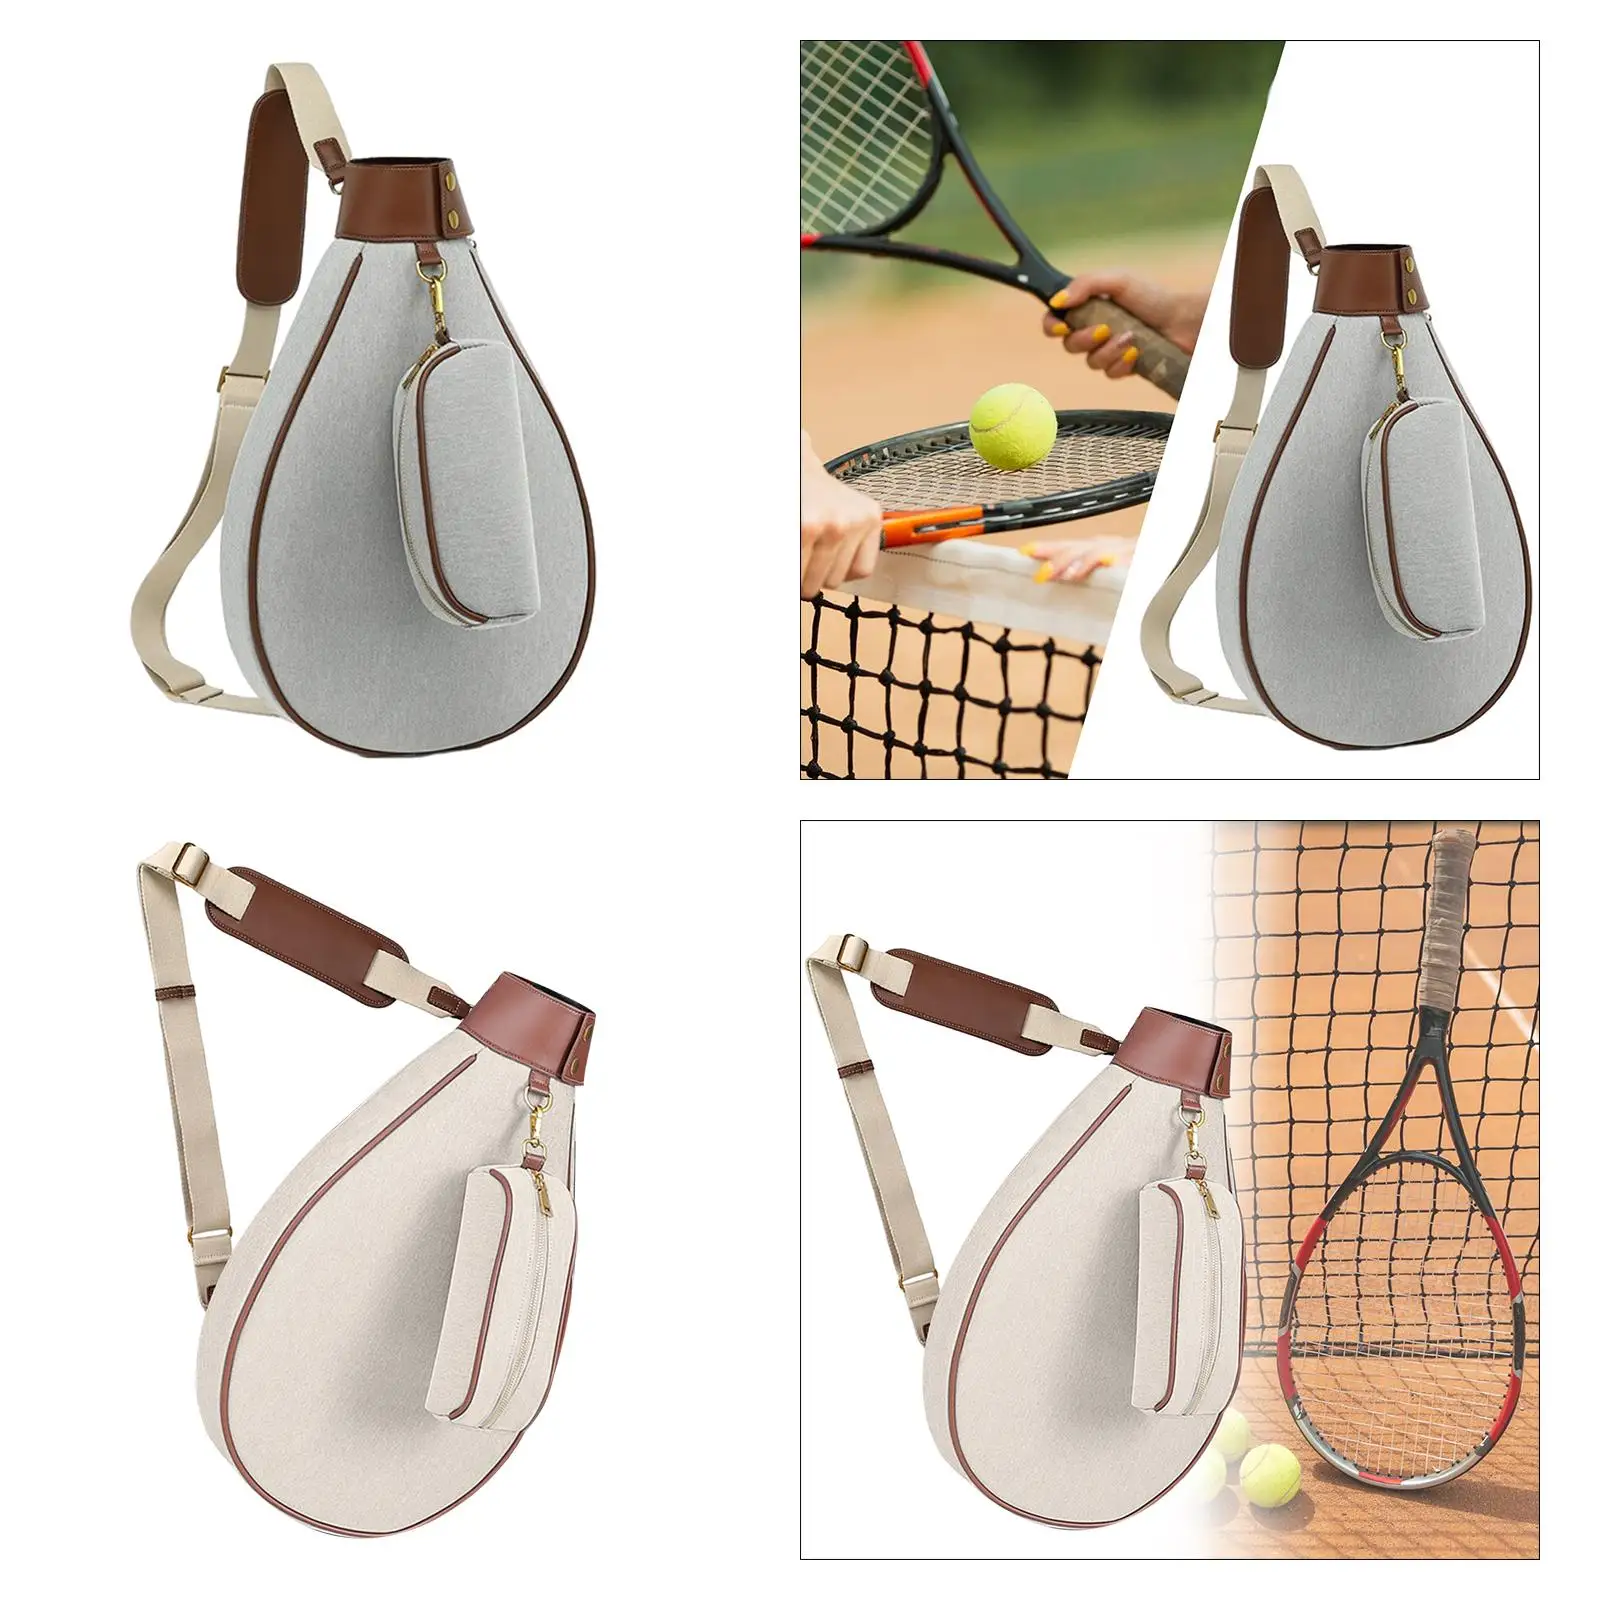 Tennis Bag Players Portable Durable Multifunctional Racket Cover for Badminton/squash Racquet/Tennis/Pickleball and Accessories